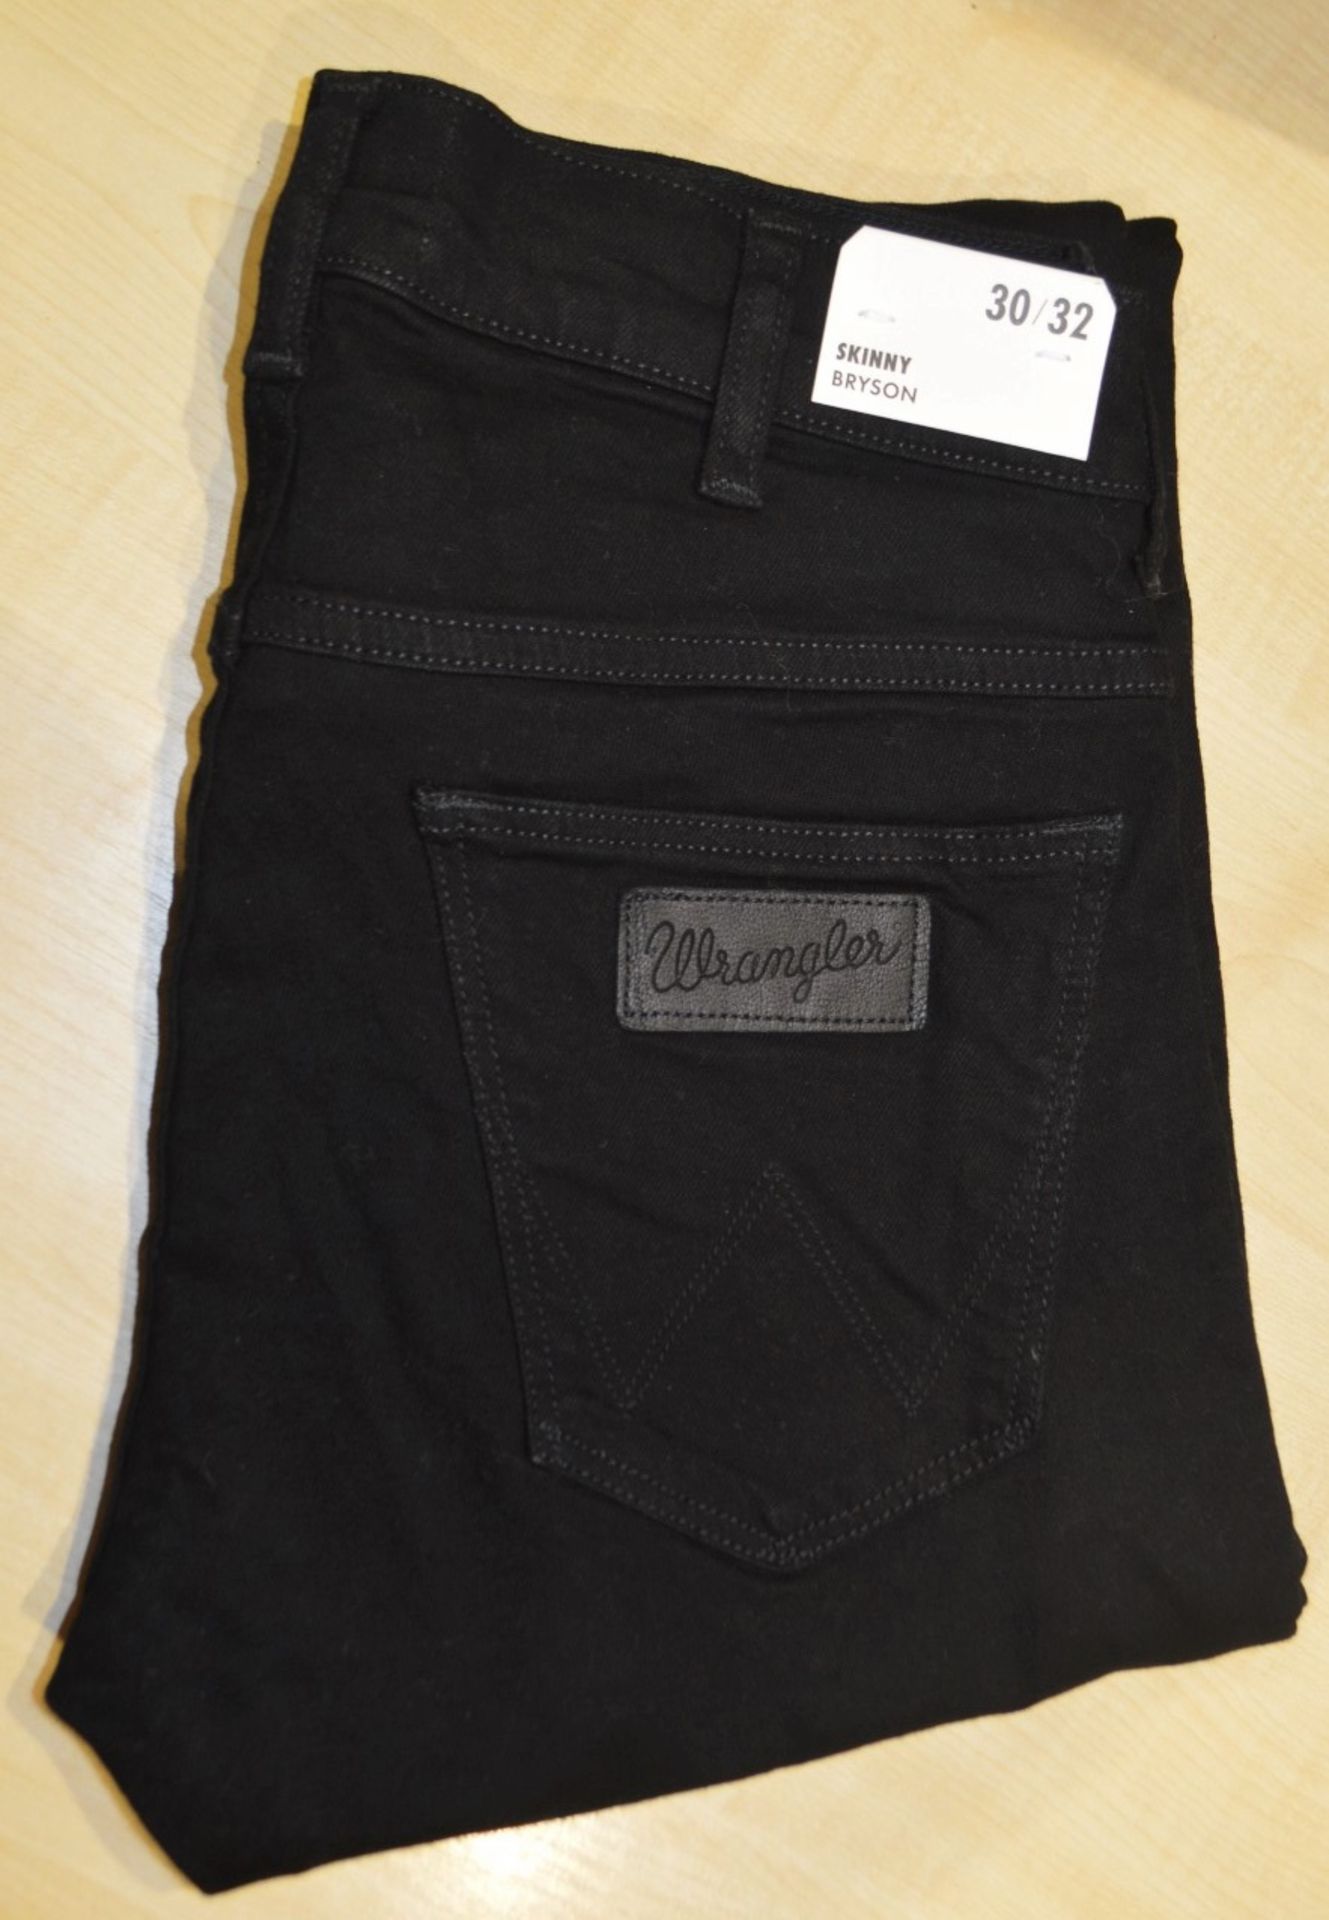 1 x Pair Of Men's Genuine Wrangler Jeans In Black - Size: 30/32 - Preowned, Like New With Tags - - Image 8 of 10